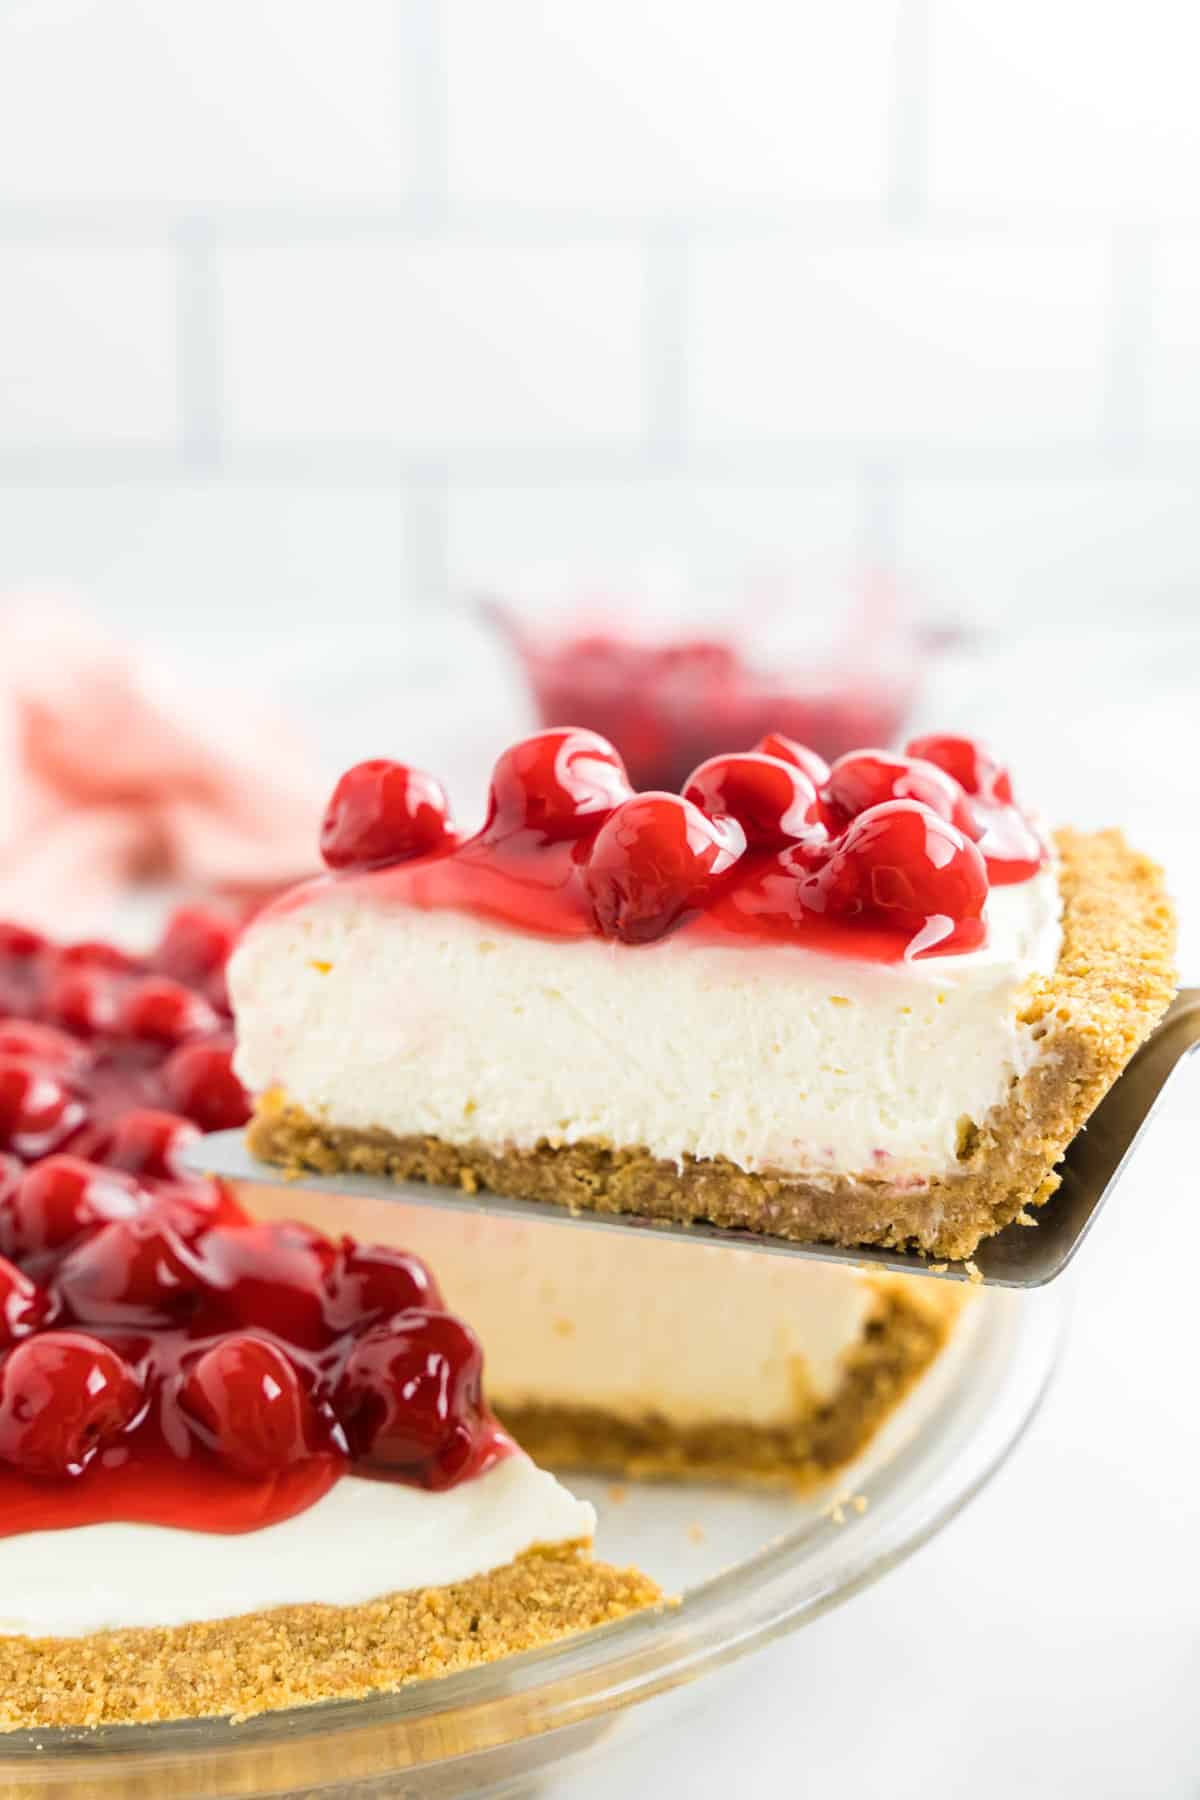 Easy No Bake Cheesecake Sliced and Ready to for the First Bite